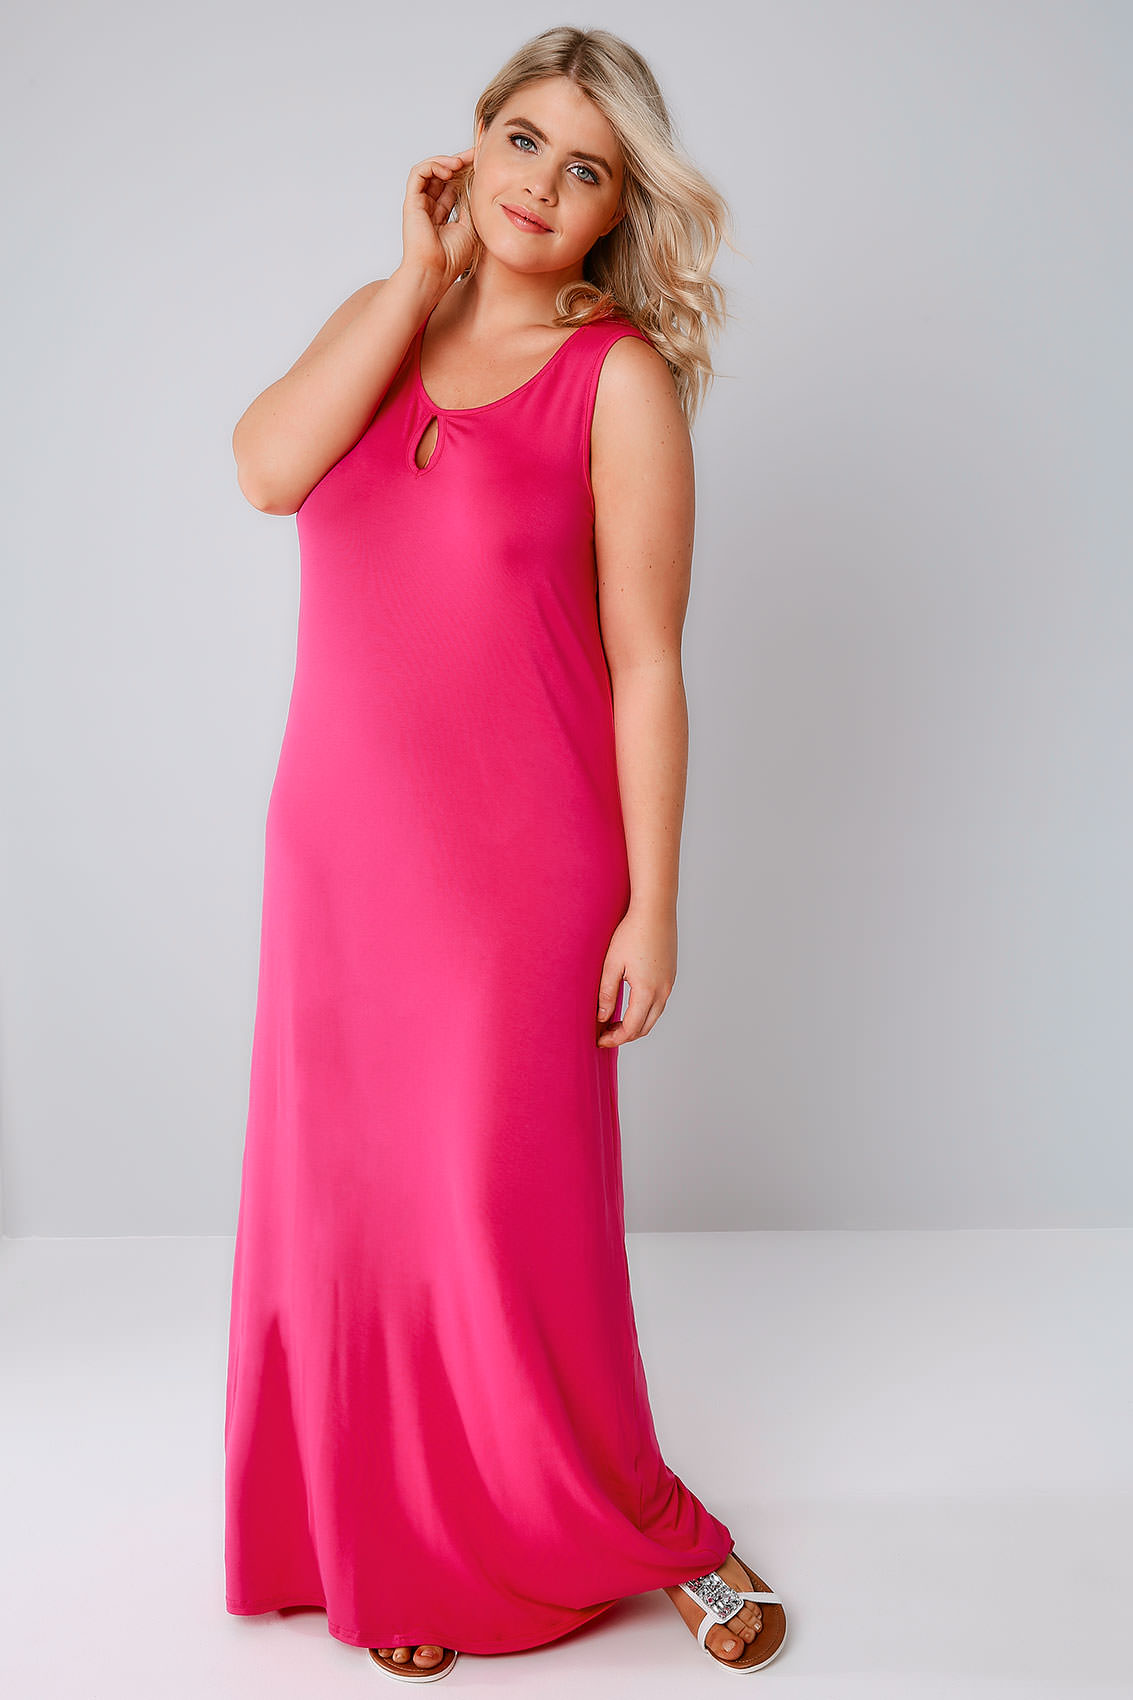 Hot Pink Jersey Maxi Dress With Keyhole Detail, Plus size 16 to 36